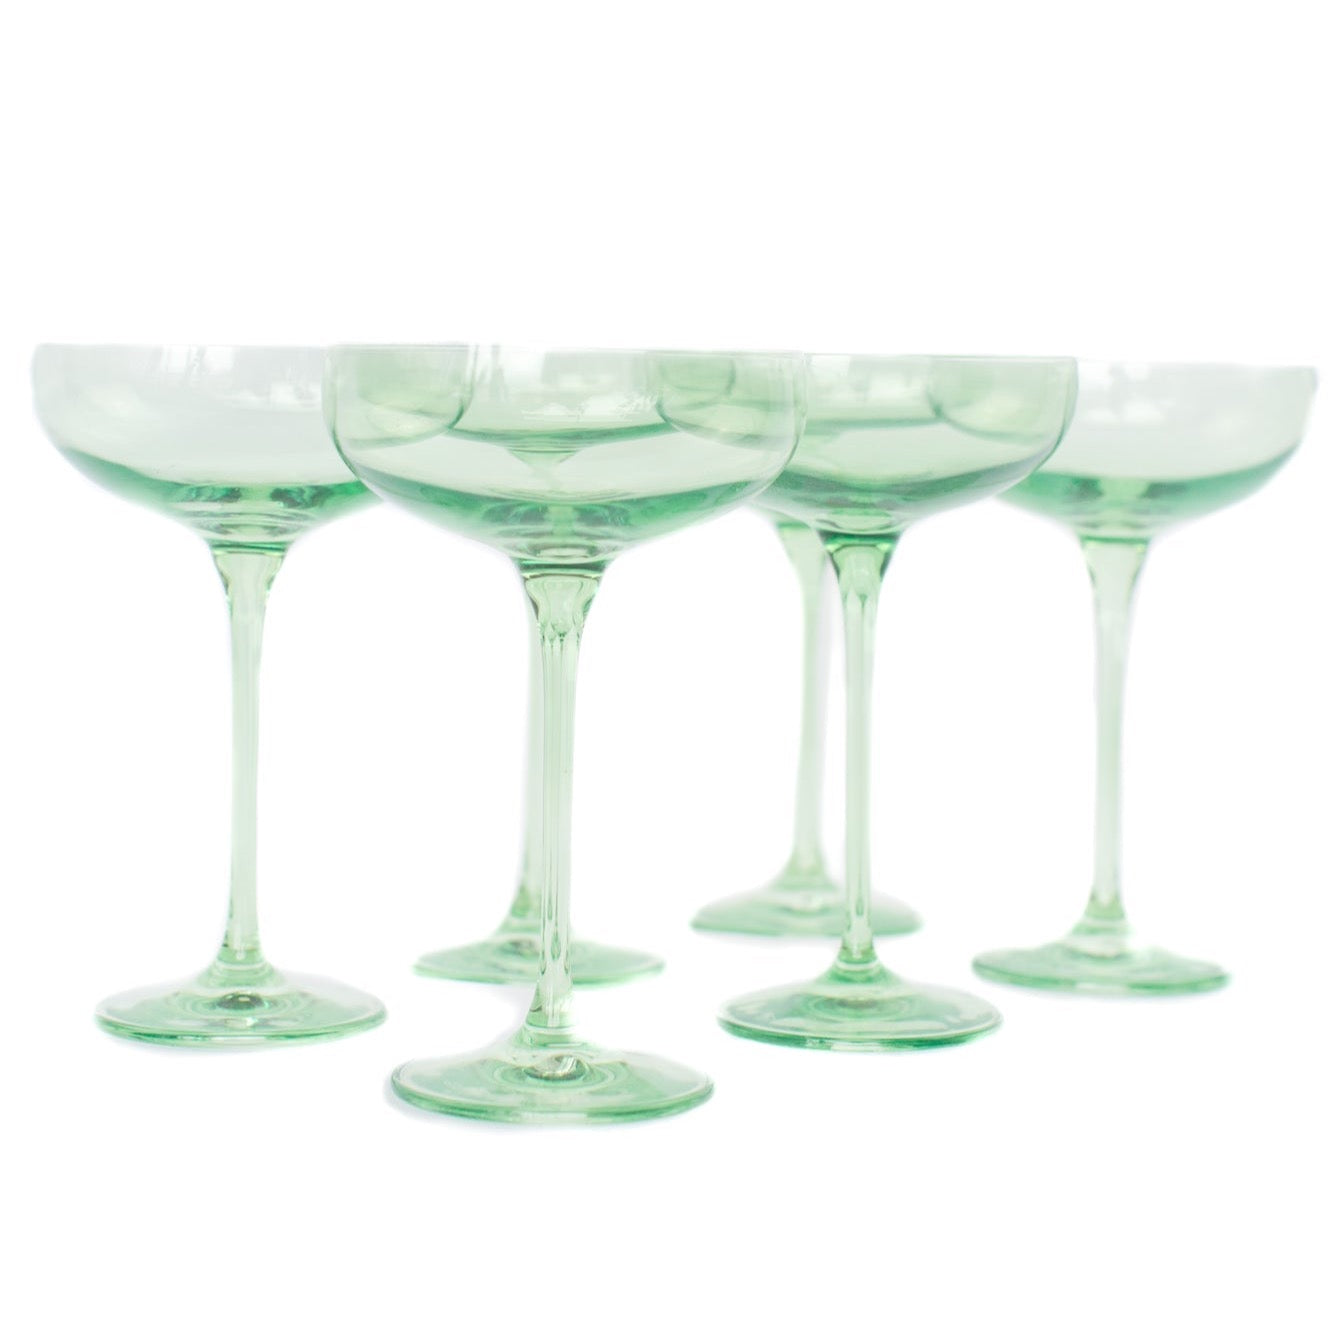 Load image into Gallery viewer, Estelle Champagne Coupe Glasses - Set of 6 - Mint
